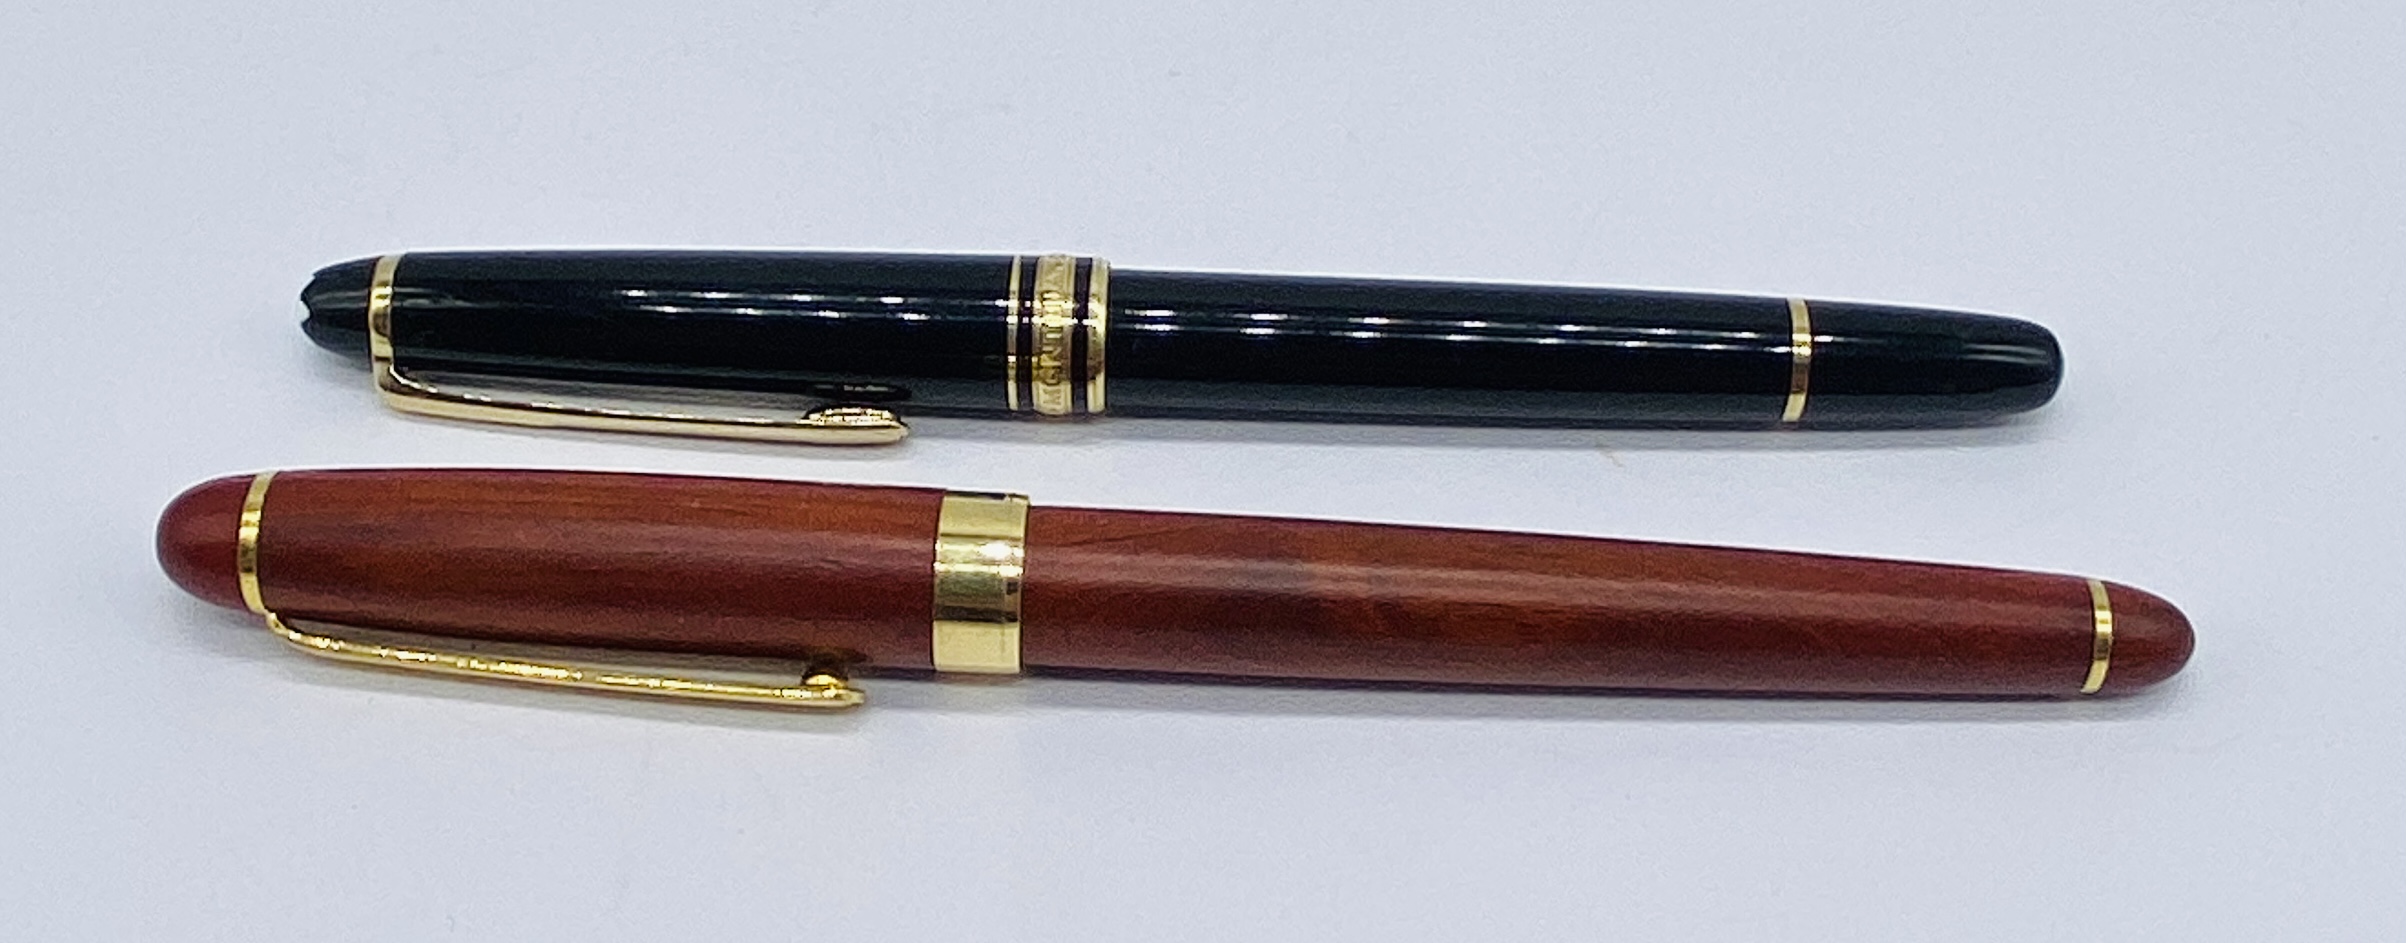 A Mont Blanc Meisterstuck fountain pen along with one other - Image 3 of 5